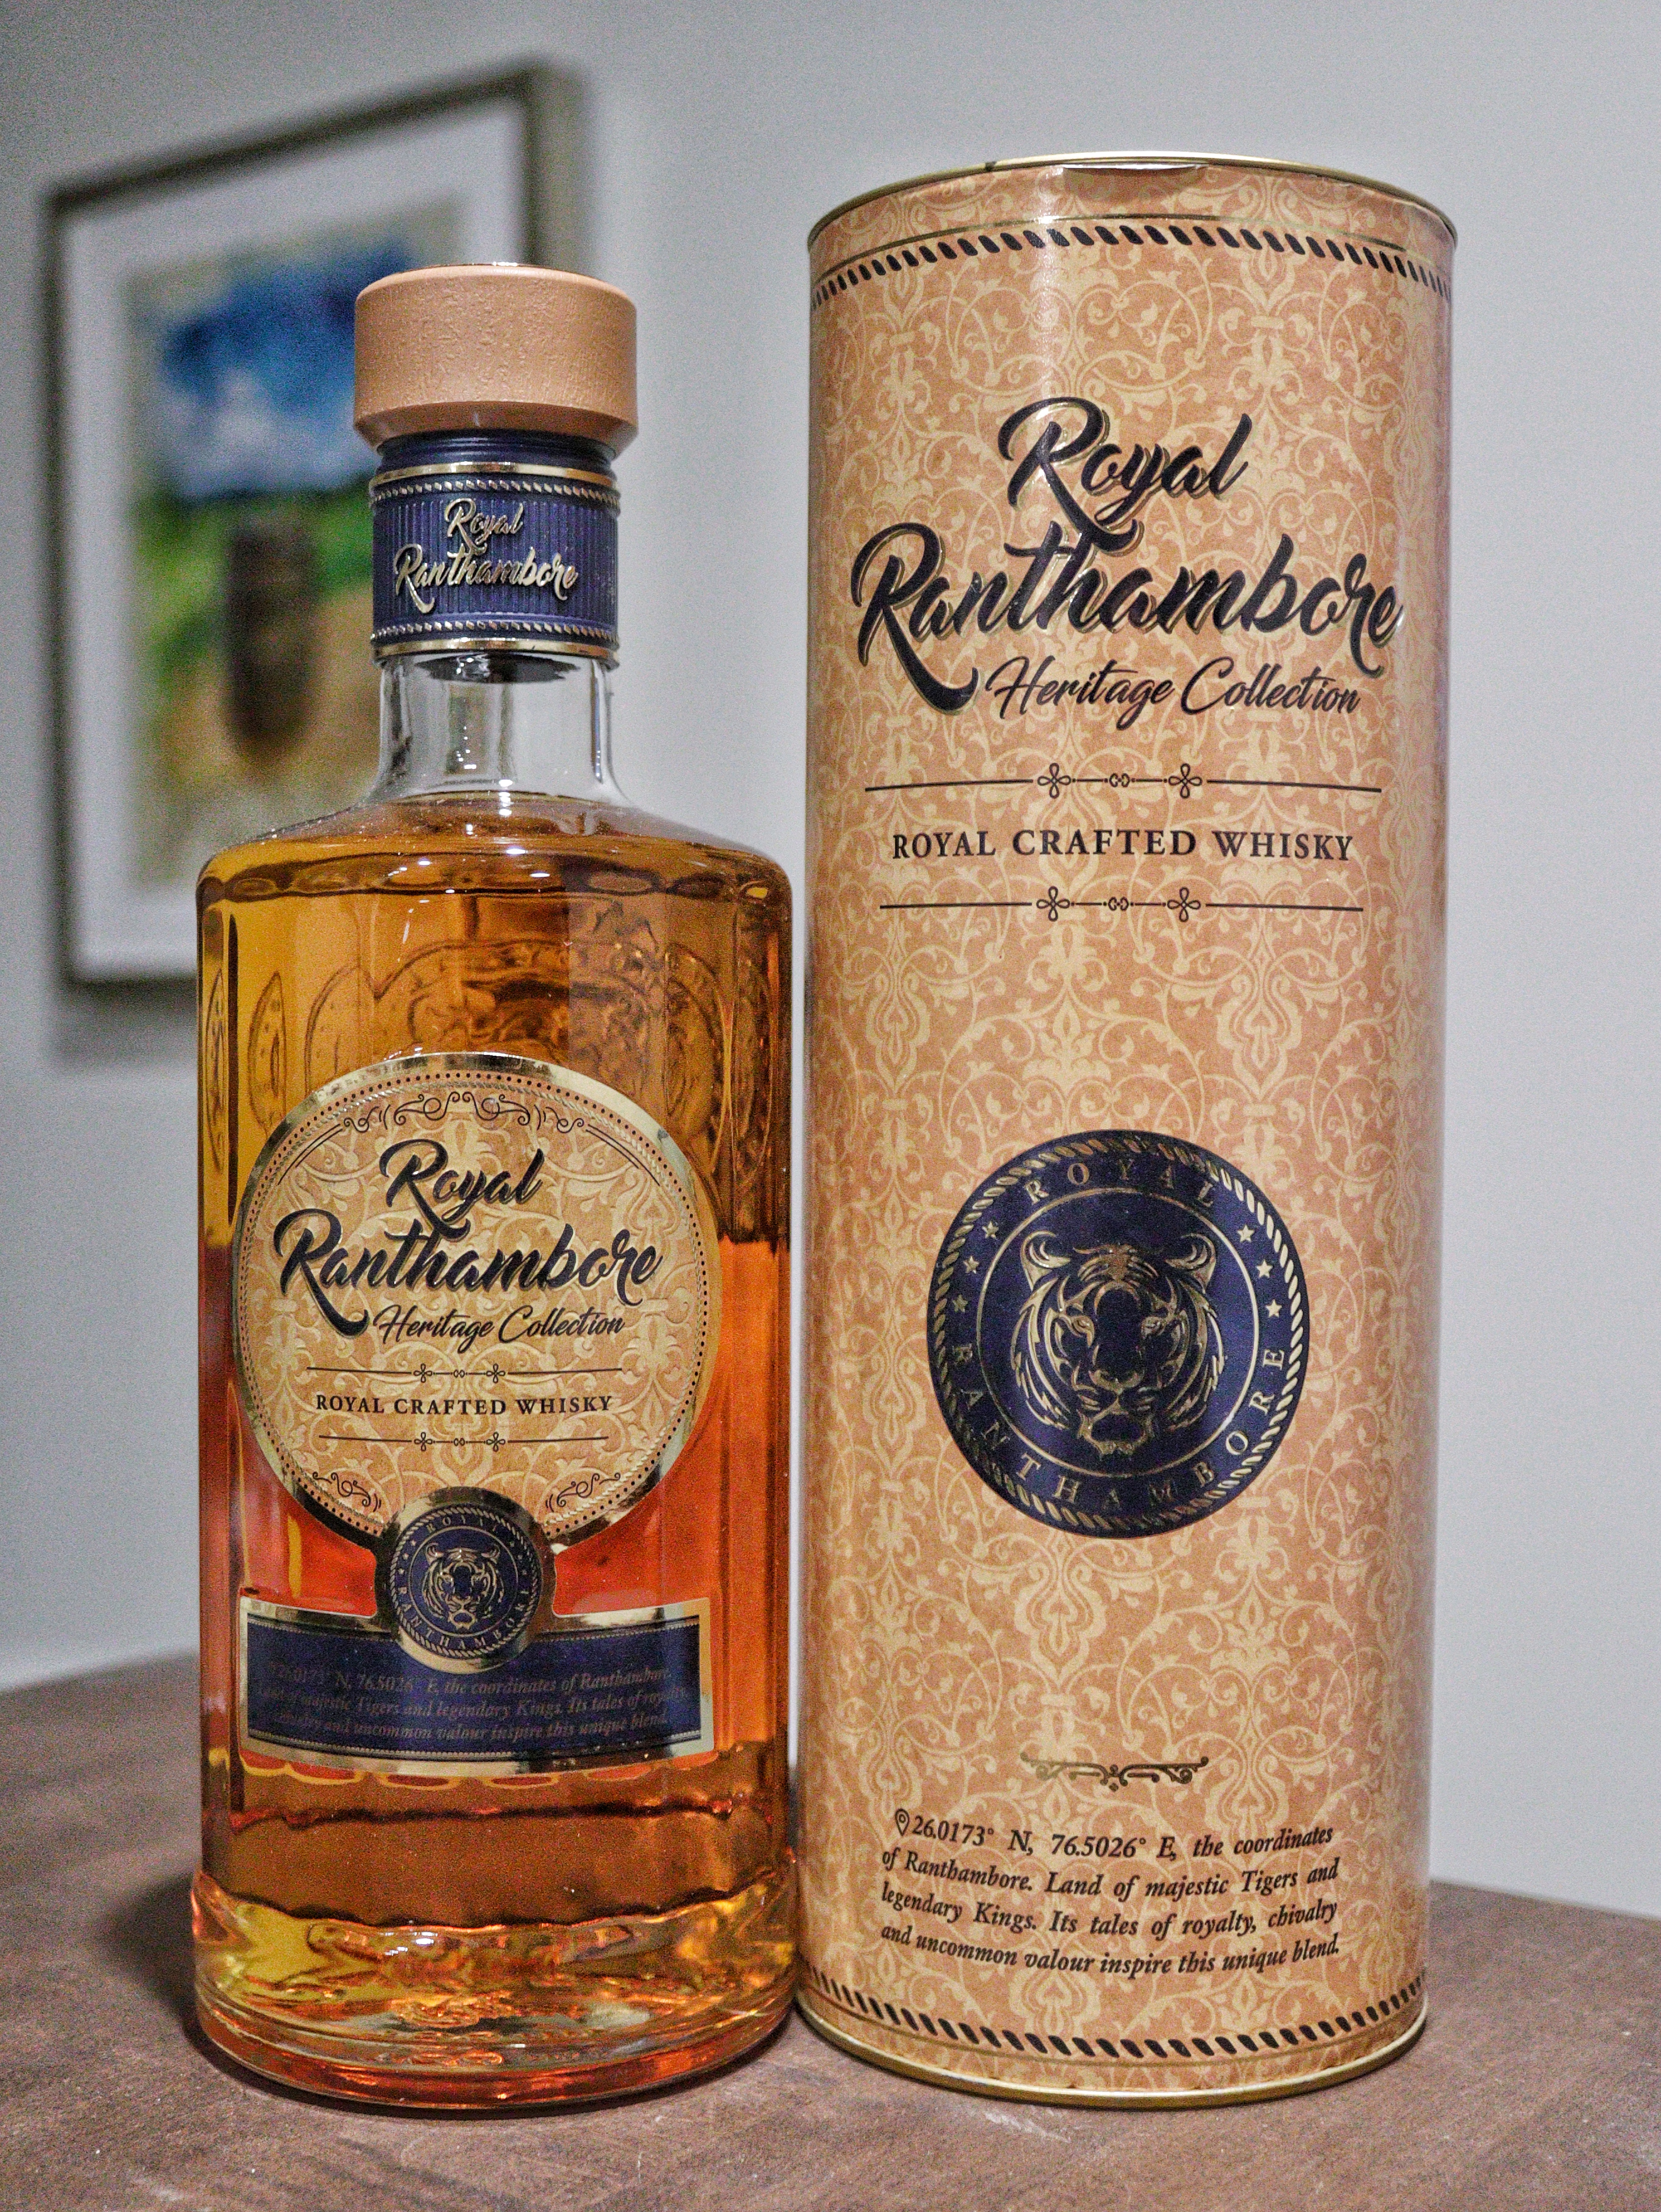 Discovering Indian Whisky! An Interview with Royal Ranthambore